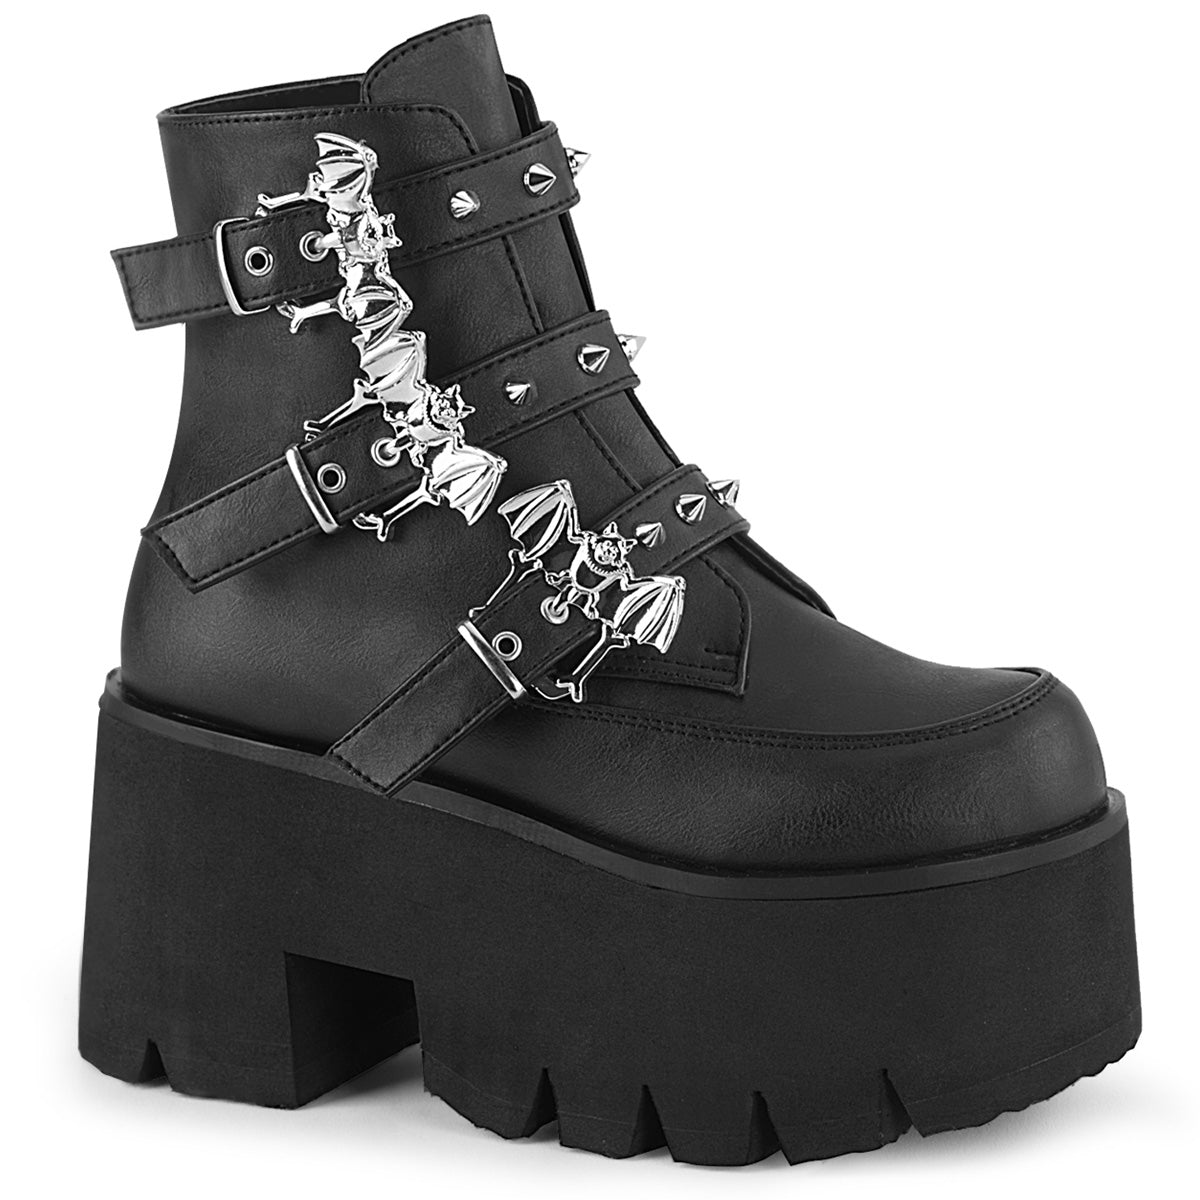 DemoniaCult Womens Ankle Boots ASHES-55 Blk Vegan Leather